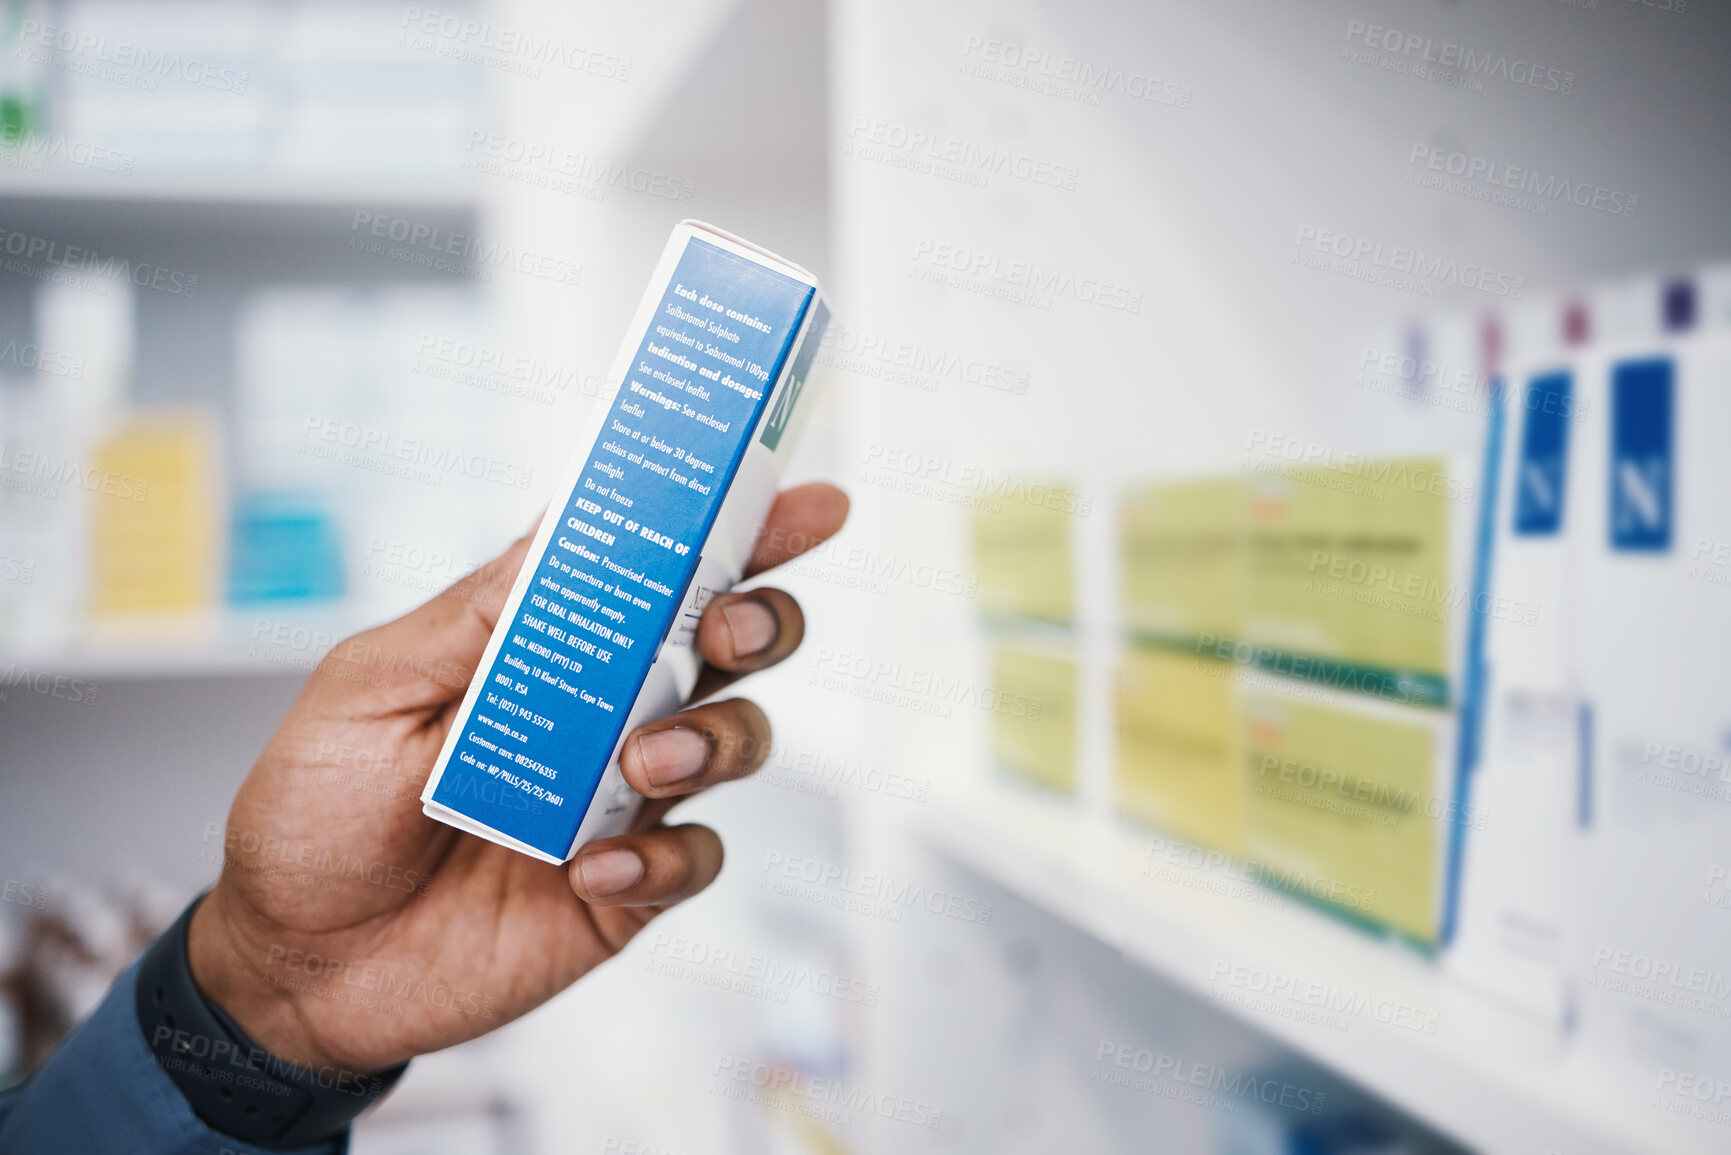 Buy stock photo Pharmacy, medicine and pills, man and box in hand, healthcare and prescription medication in drug store. Medical, closeup and pharmaceutical product for health, wellness and treatment with pharmacist